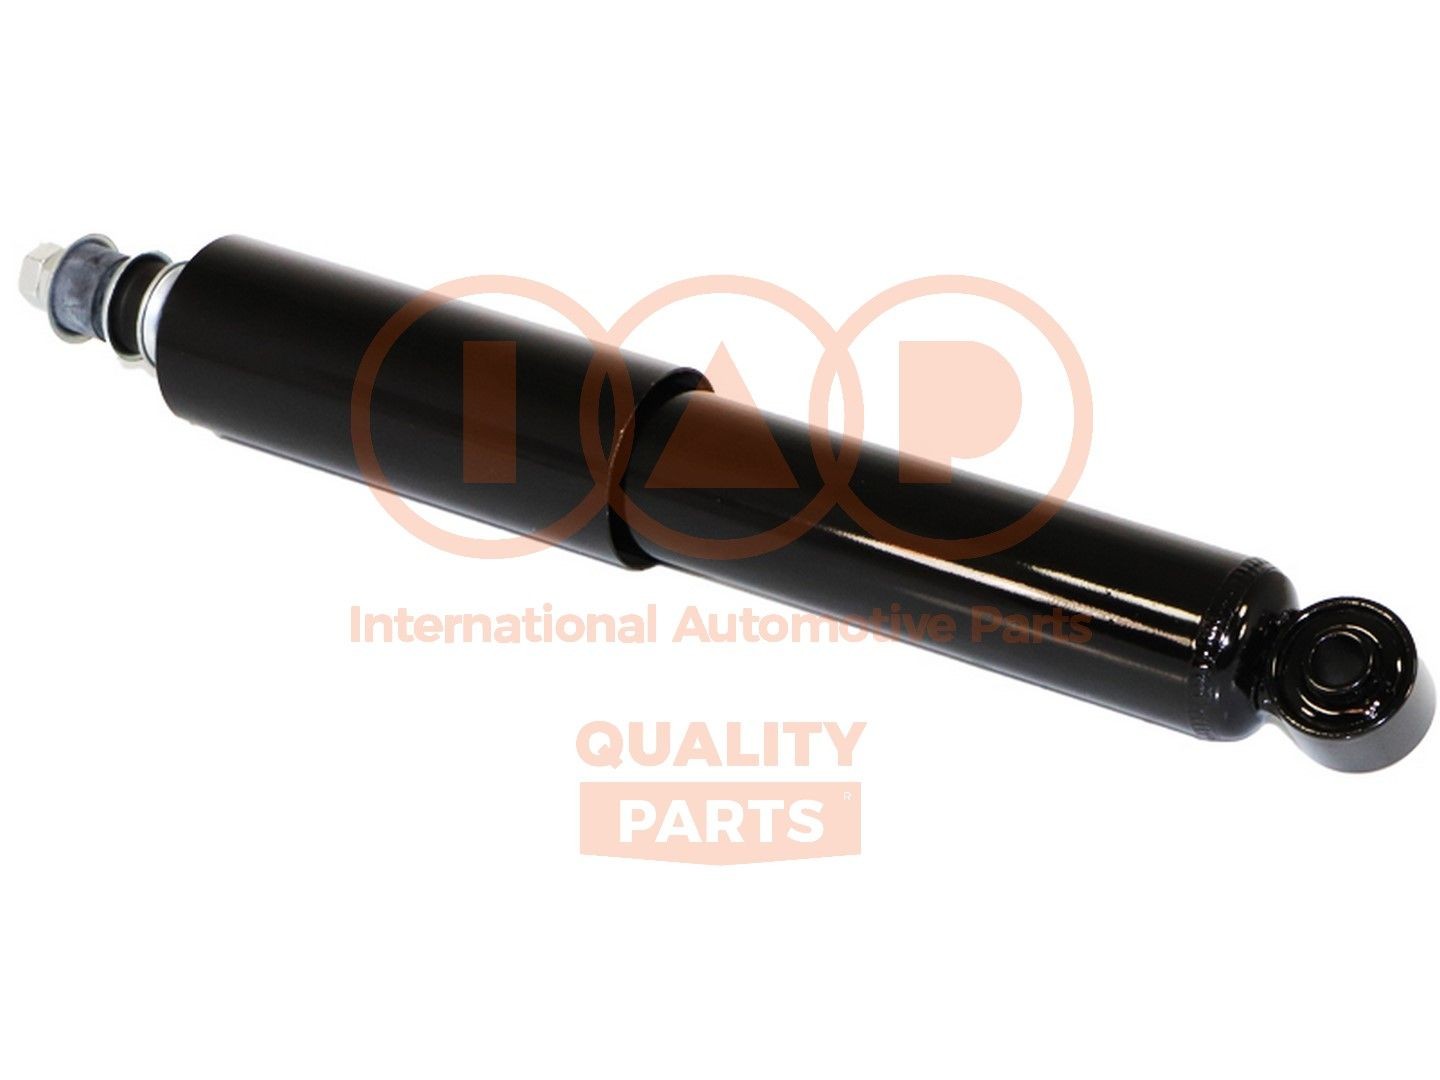 IAP QUALITY PARTS 504-13170 Shock absorber 56100MB20A